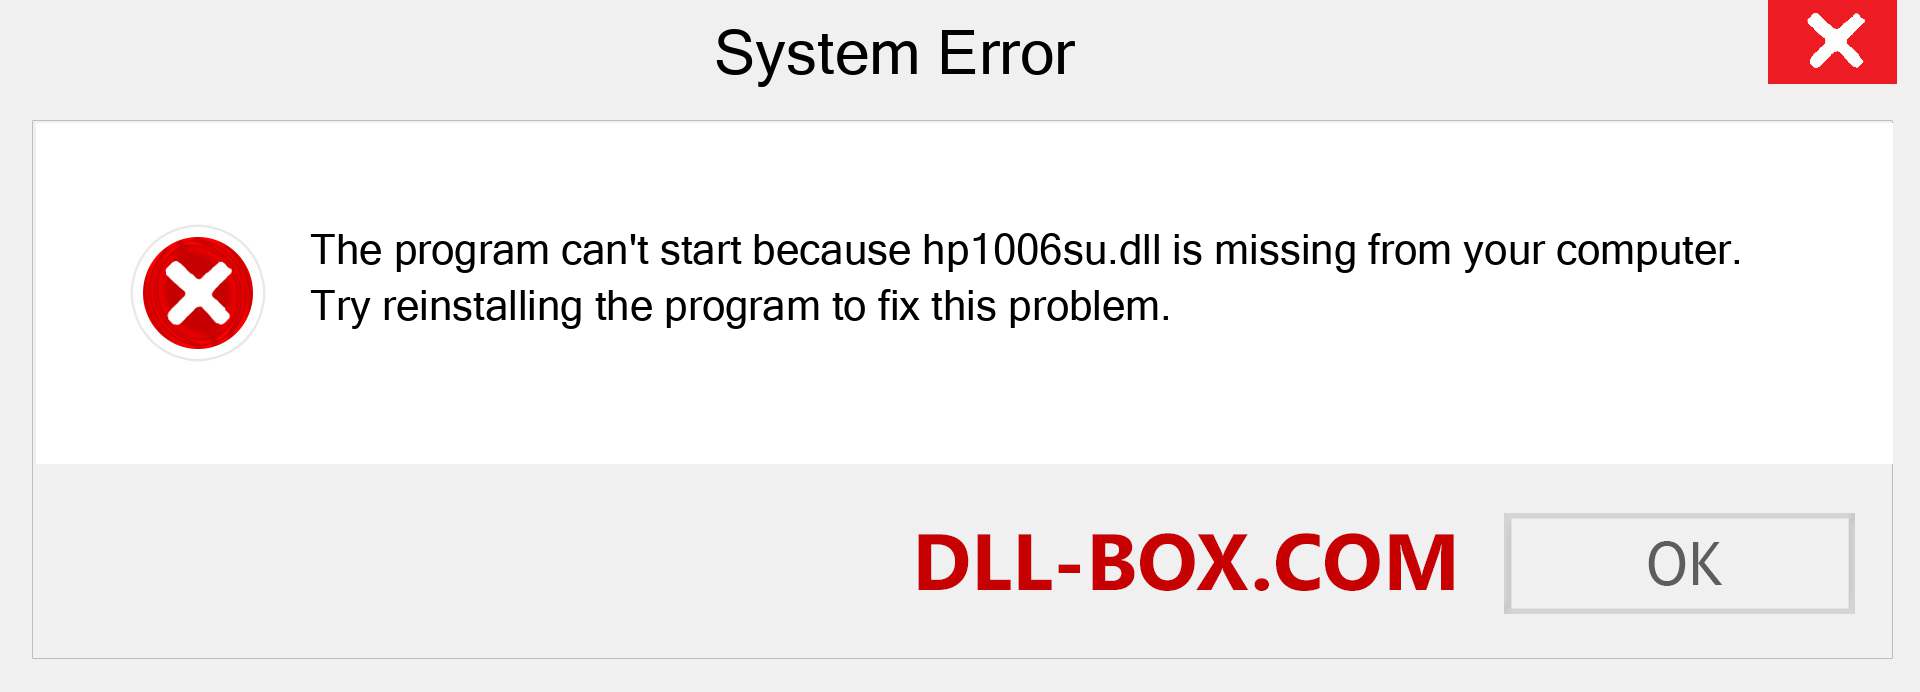  hp1006su.dll file is missing?. Download for Windows 7, 8, 10 - Fix  hp1006su dll Missing Error on Windows, photos, images